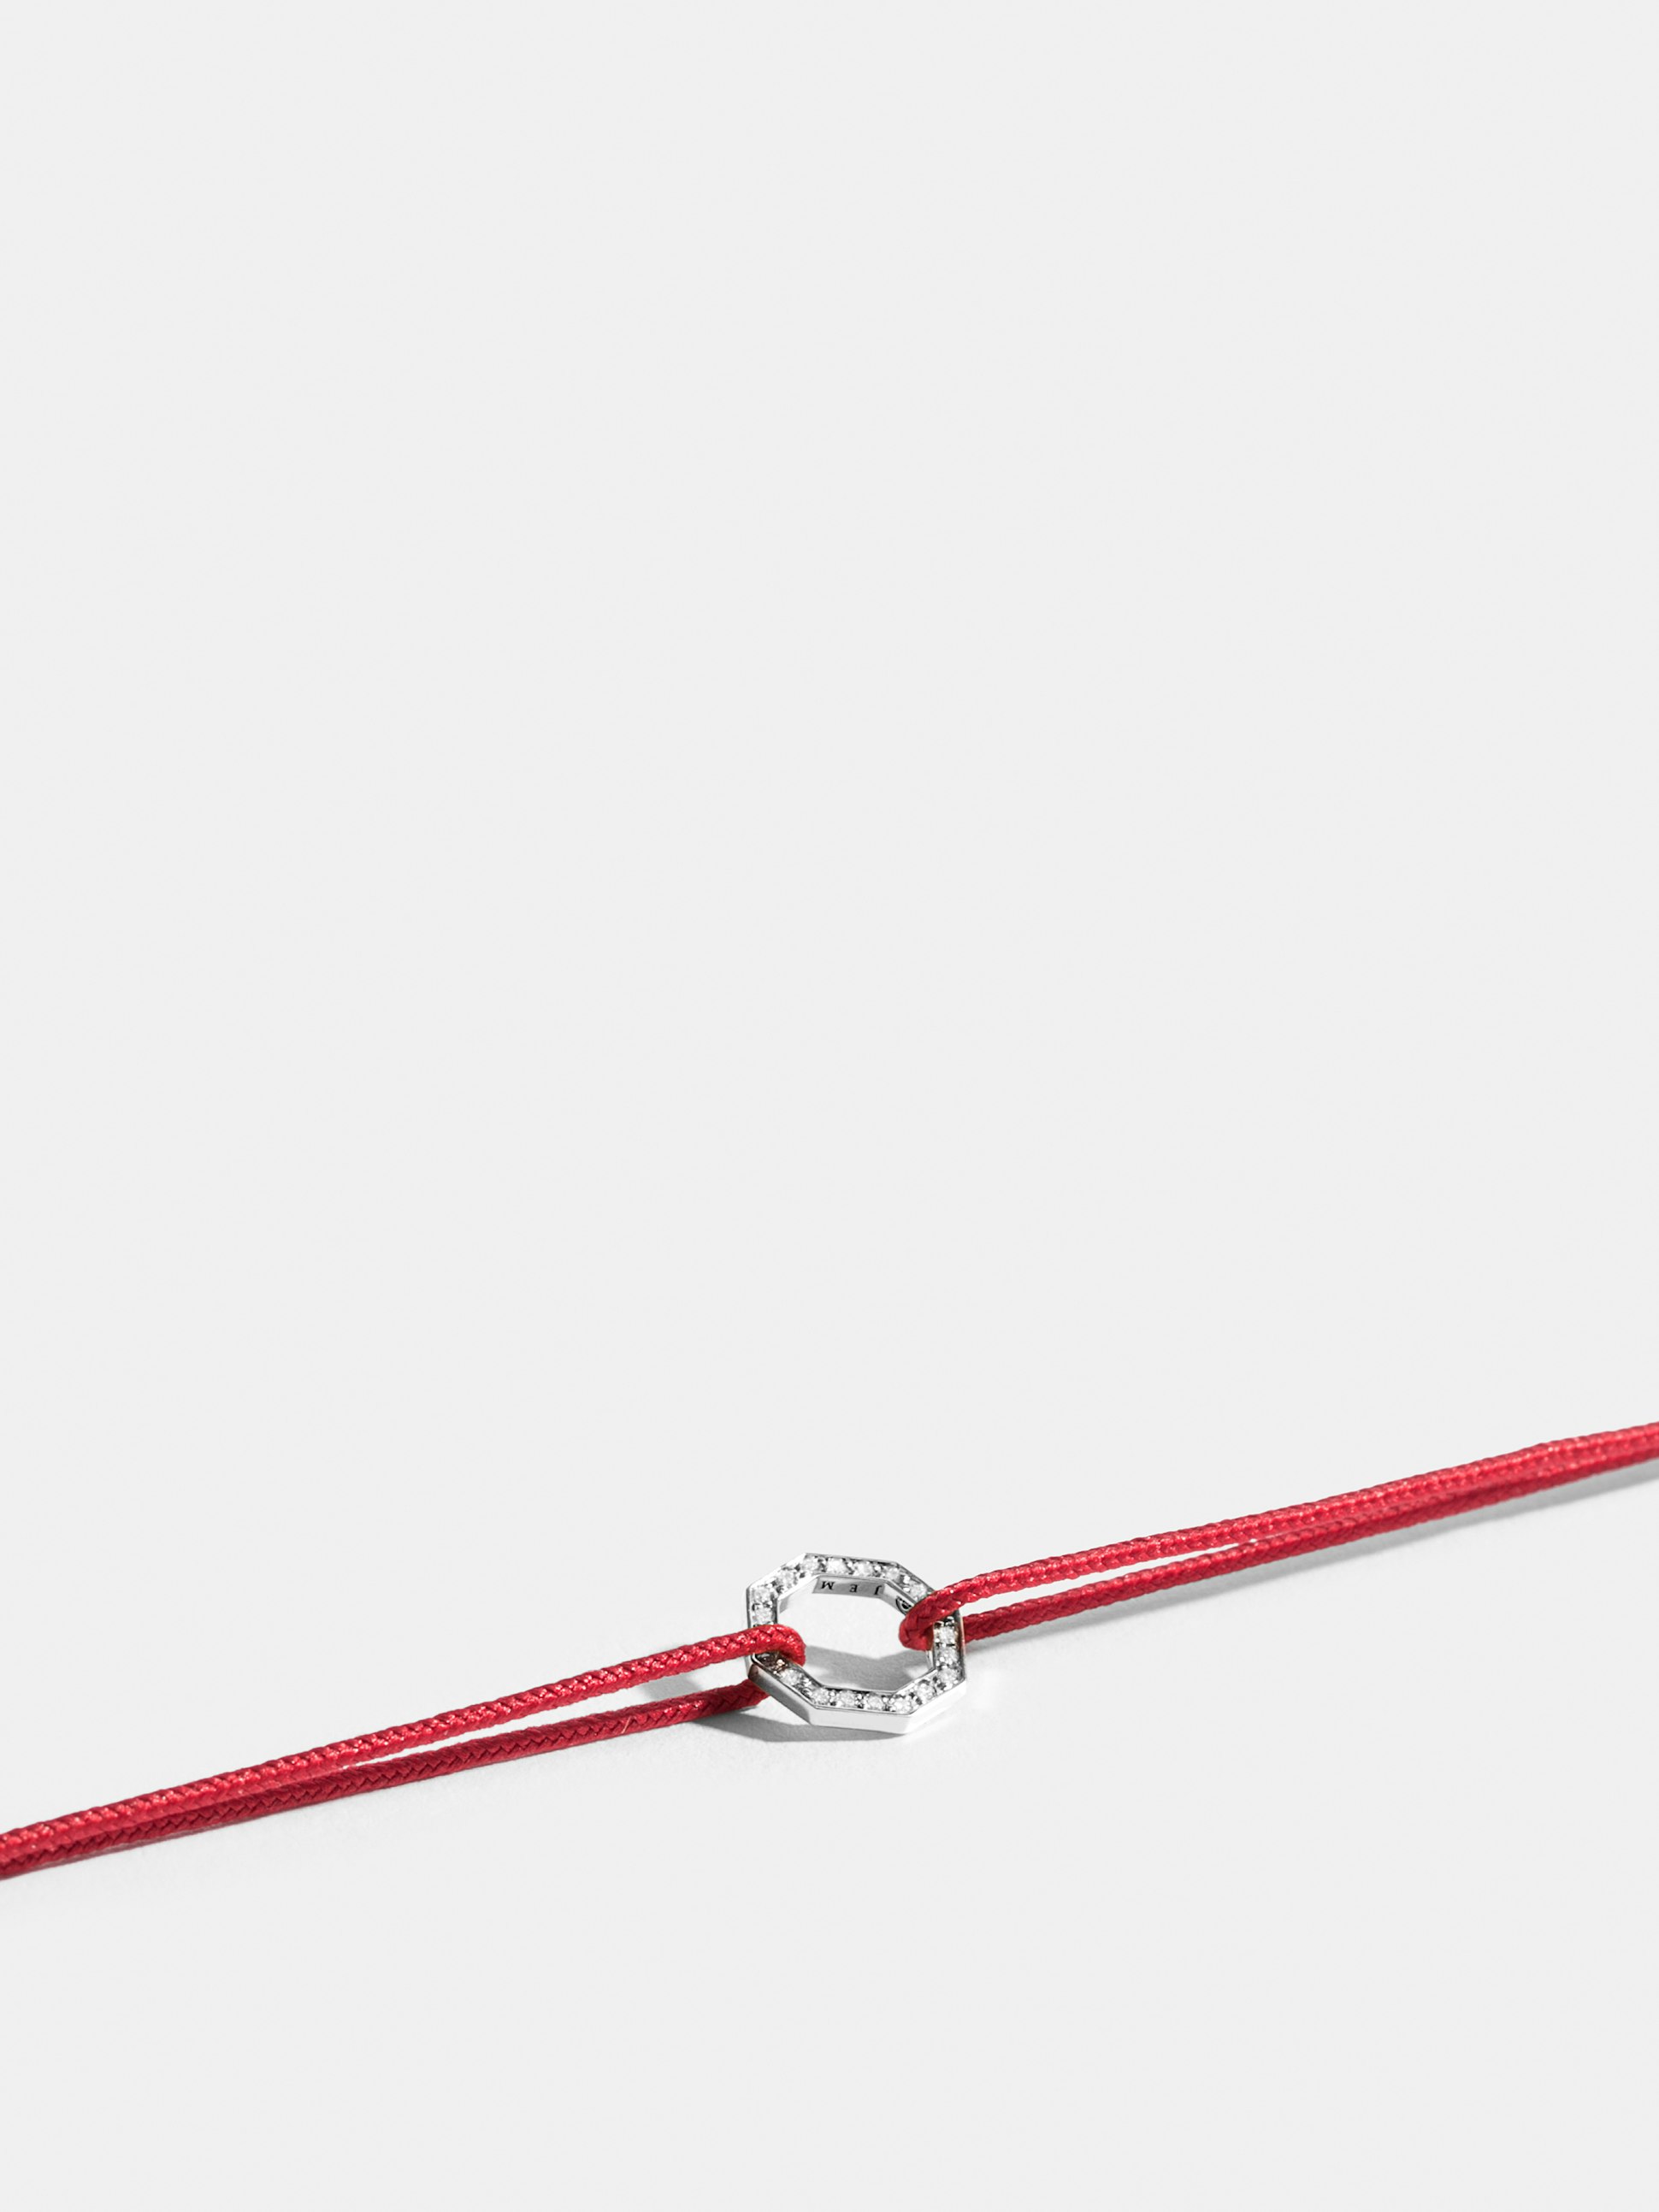 Octogone motif in 18k Fairmined ethical white gold, paved with lab-grown diamonds, on a poppy red cord.